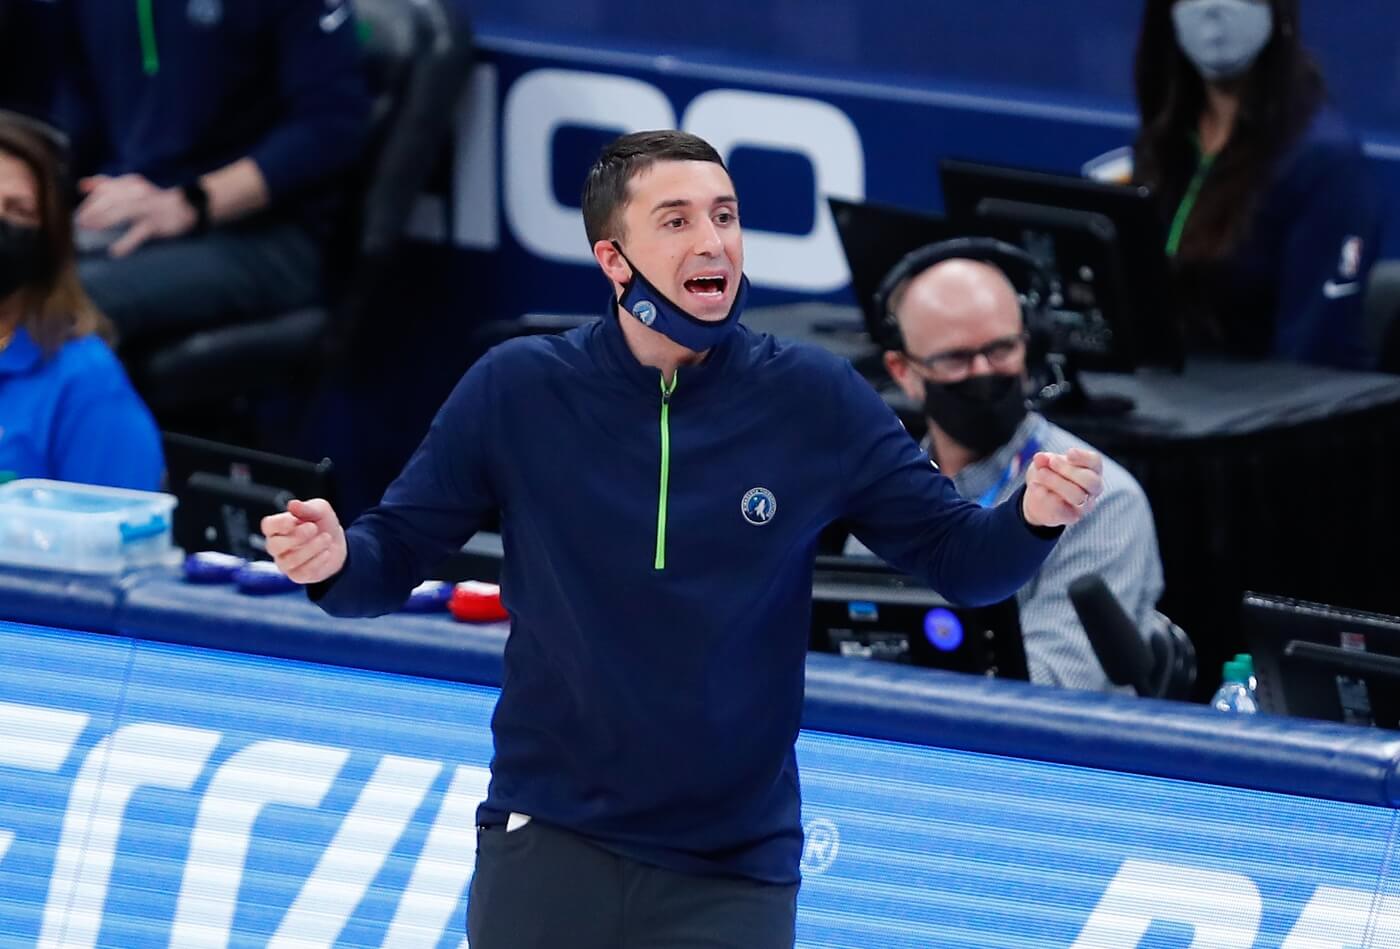 Minnesota Timberwolves head coach Ryan Saunders yells to his team on a play against the Oklahoma City Thunder in the first quarter at Chesapeake Energy Arena.